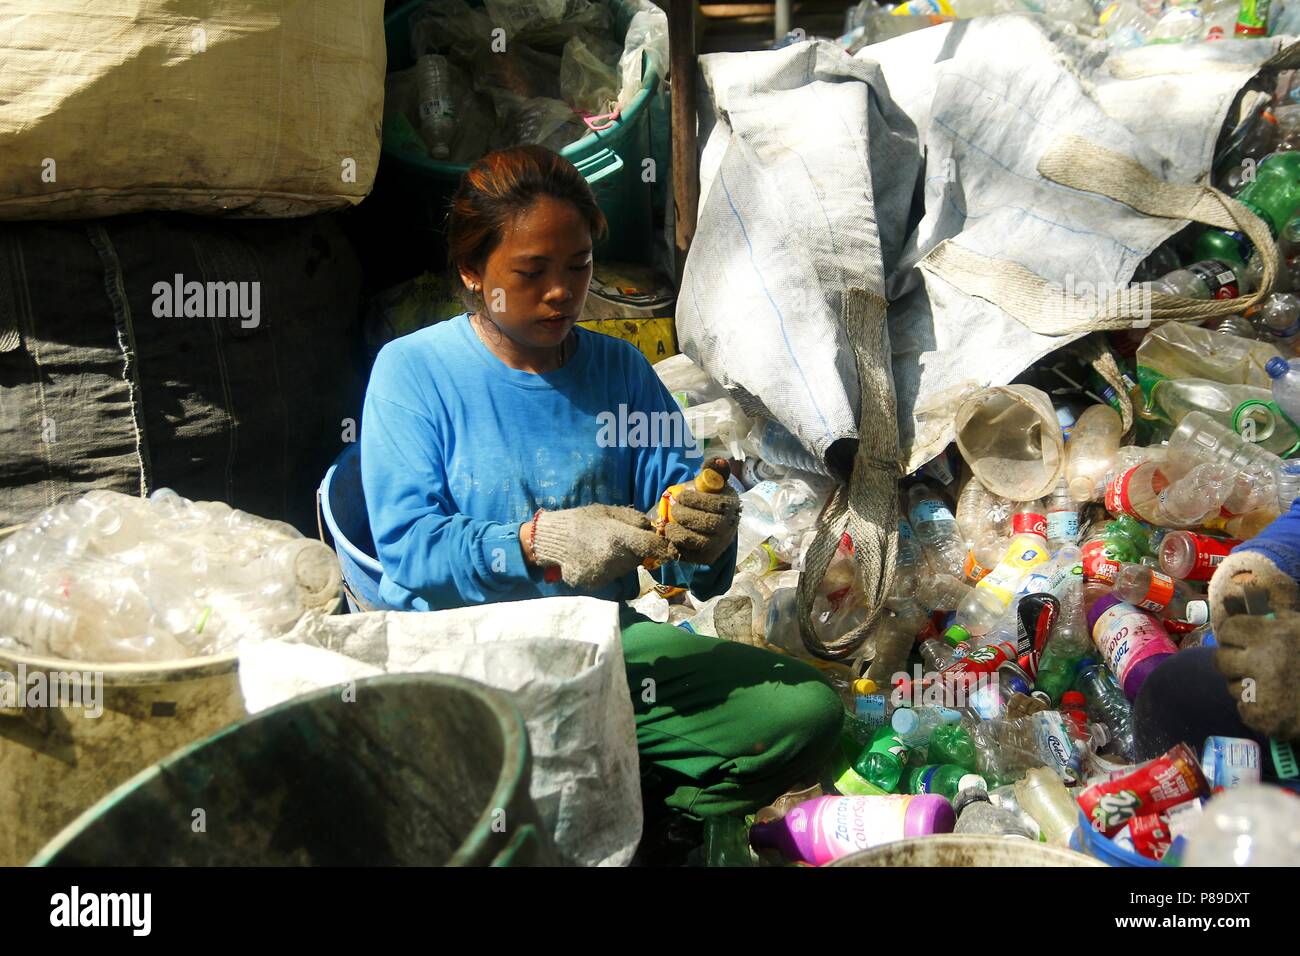 ANGONO, RIZAL, PHILIPPINES - JULY 4 2018: Workers of a materials recovery facility prepare plastic bottles for proper recycling. Stock Photo